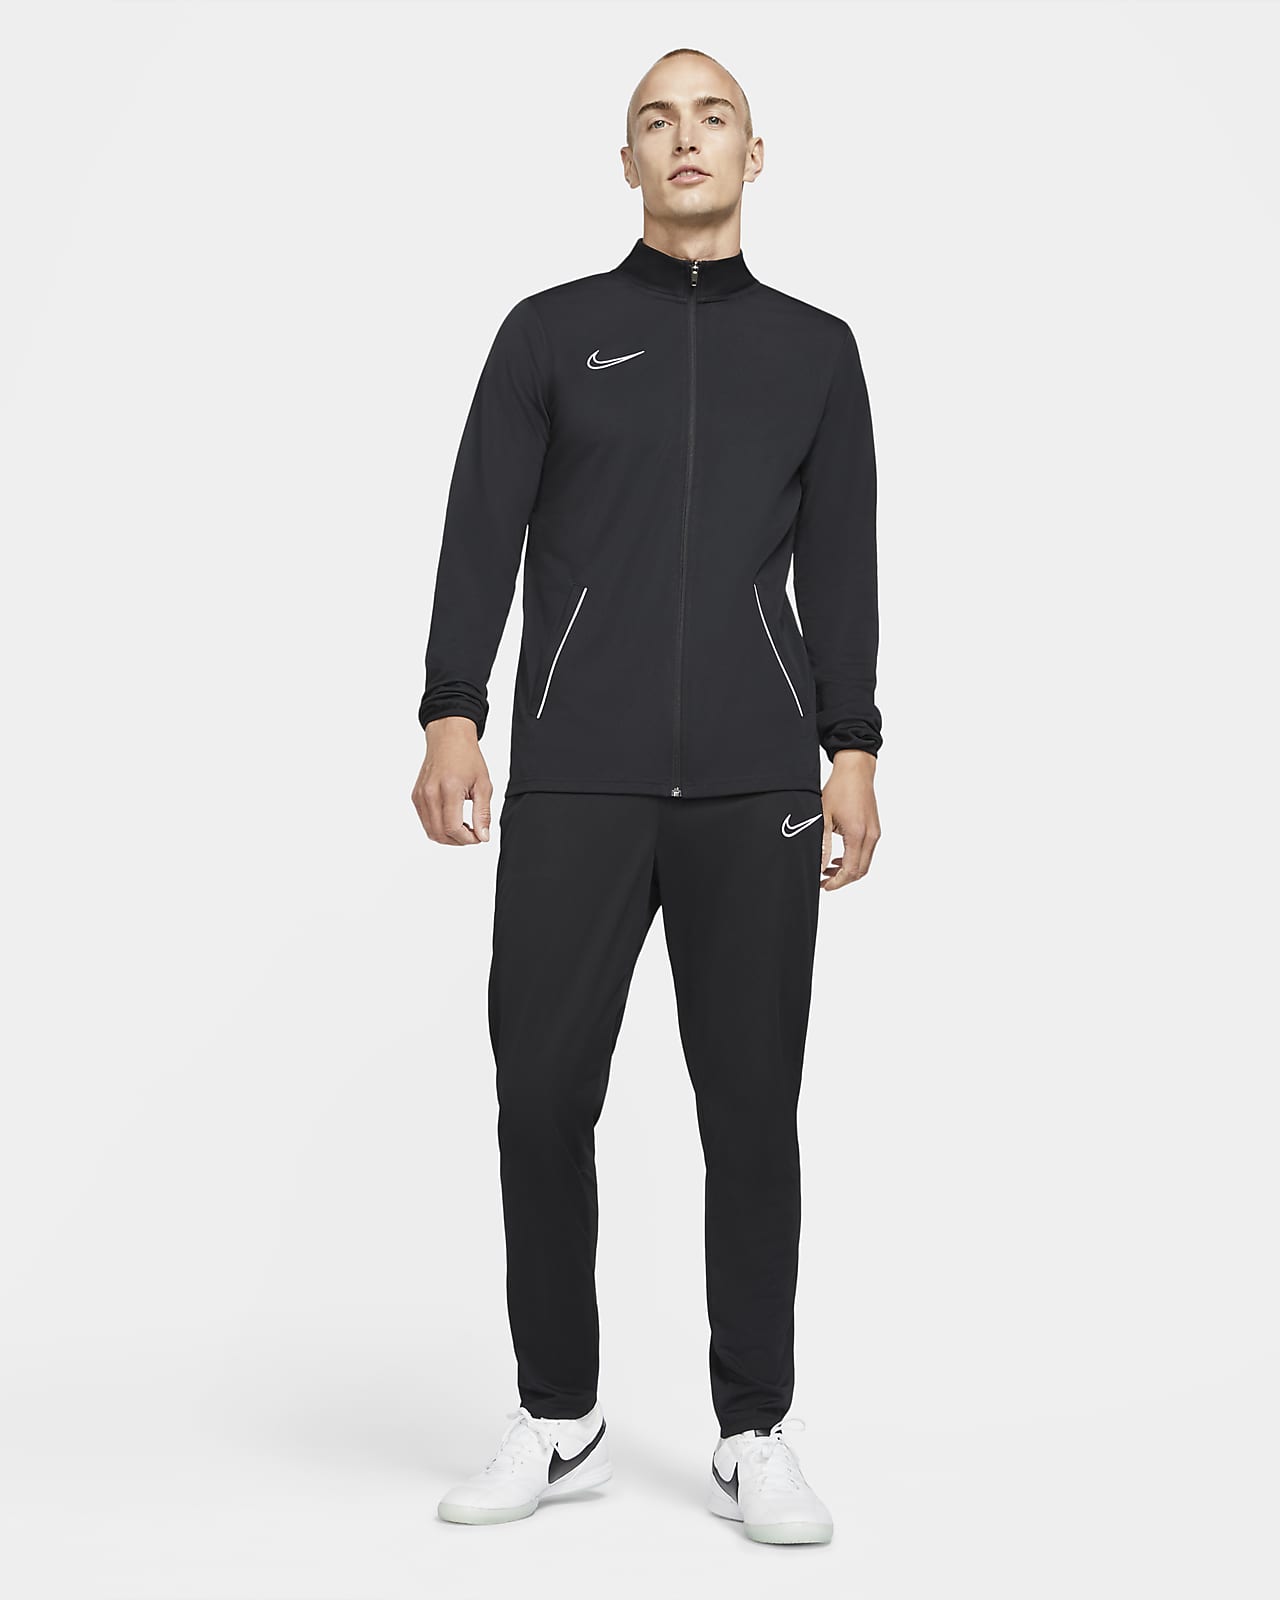 grey and black tracksuit nike